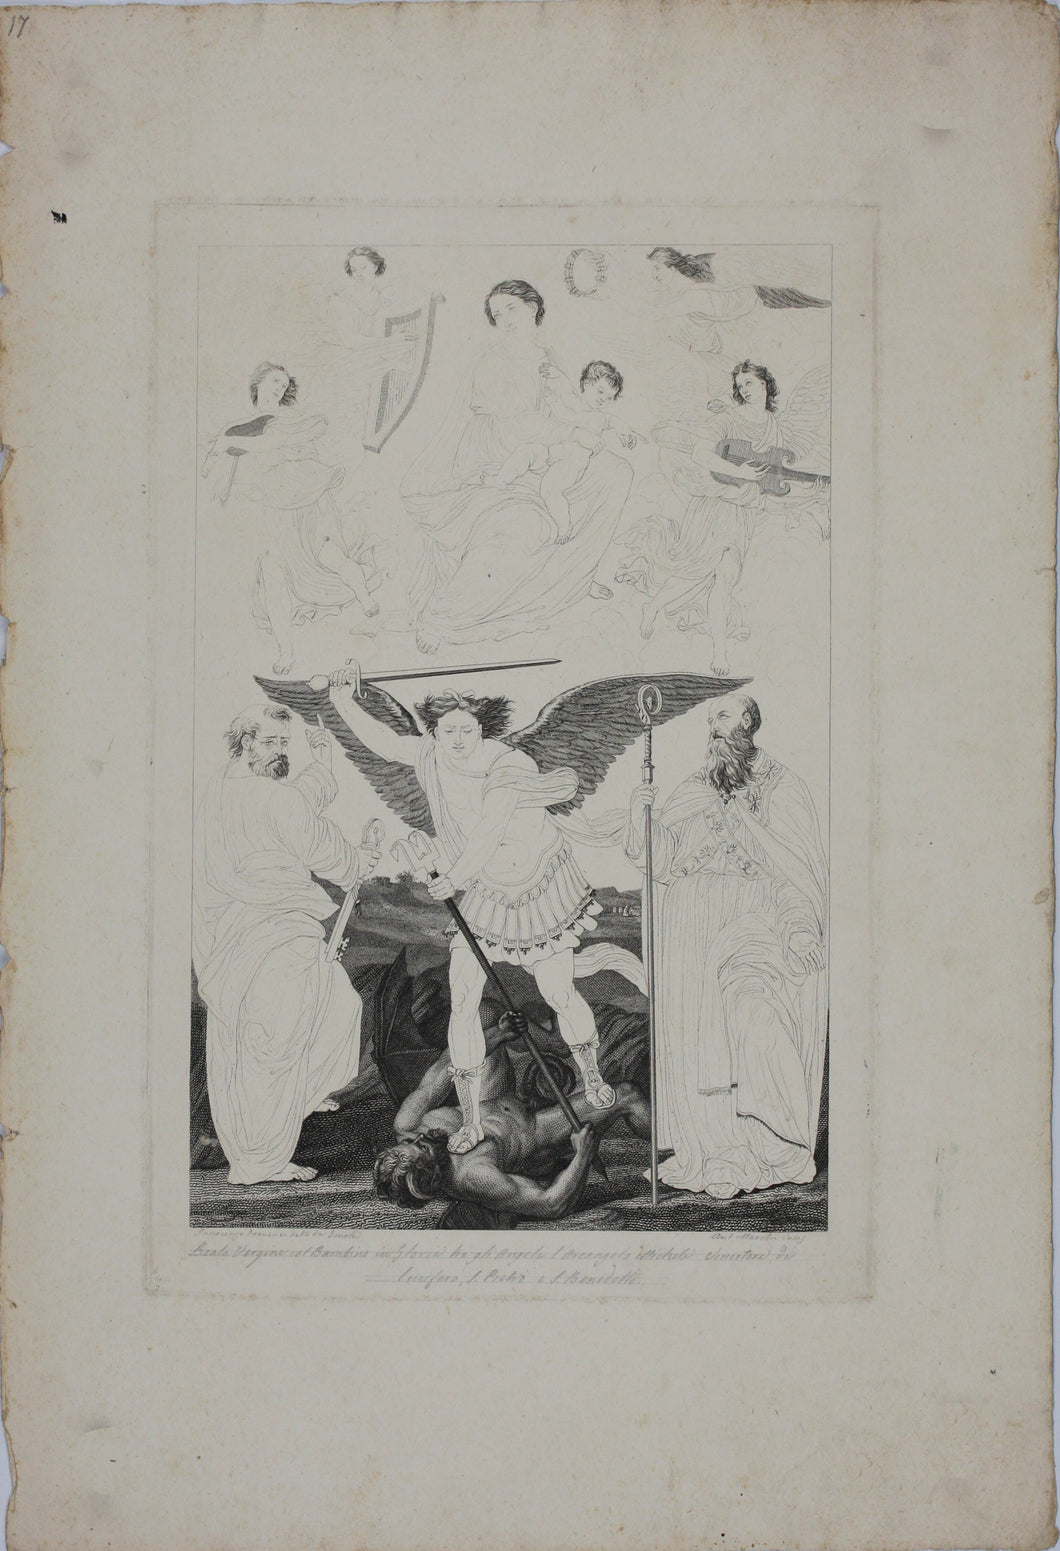 Girolamo da Cotignola, after. [Francesco Rosaspina, after]. The Virgin Mary with the Christ Child, St. John the Baptist, St. Francis of Assisi and St. Bernardino of Siena. Etching in the early intermediate state, artist's proof by Antonio Marchi. 1830.